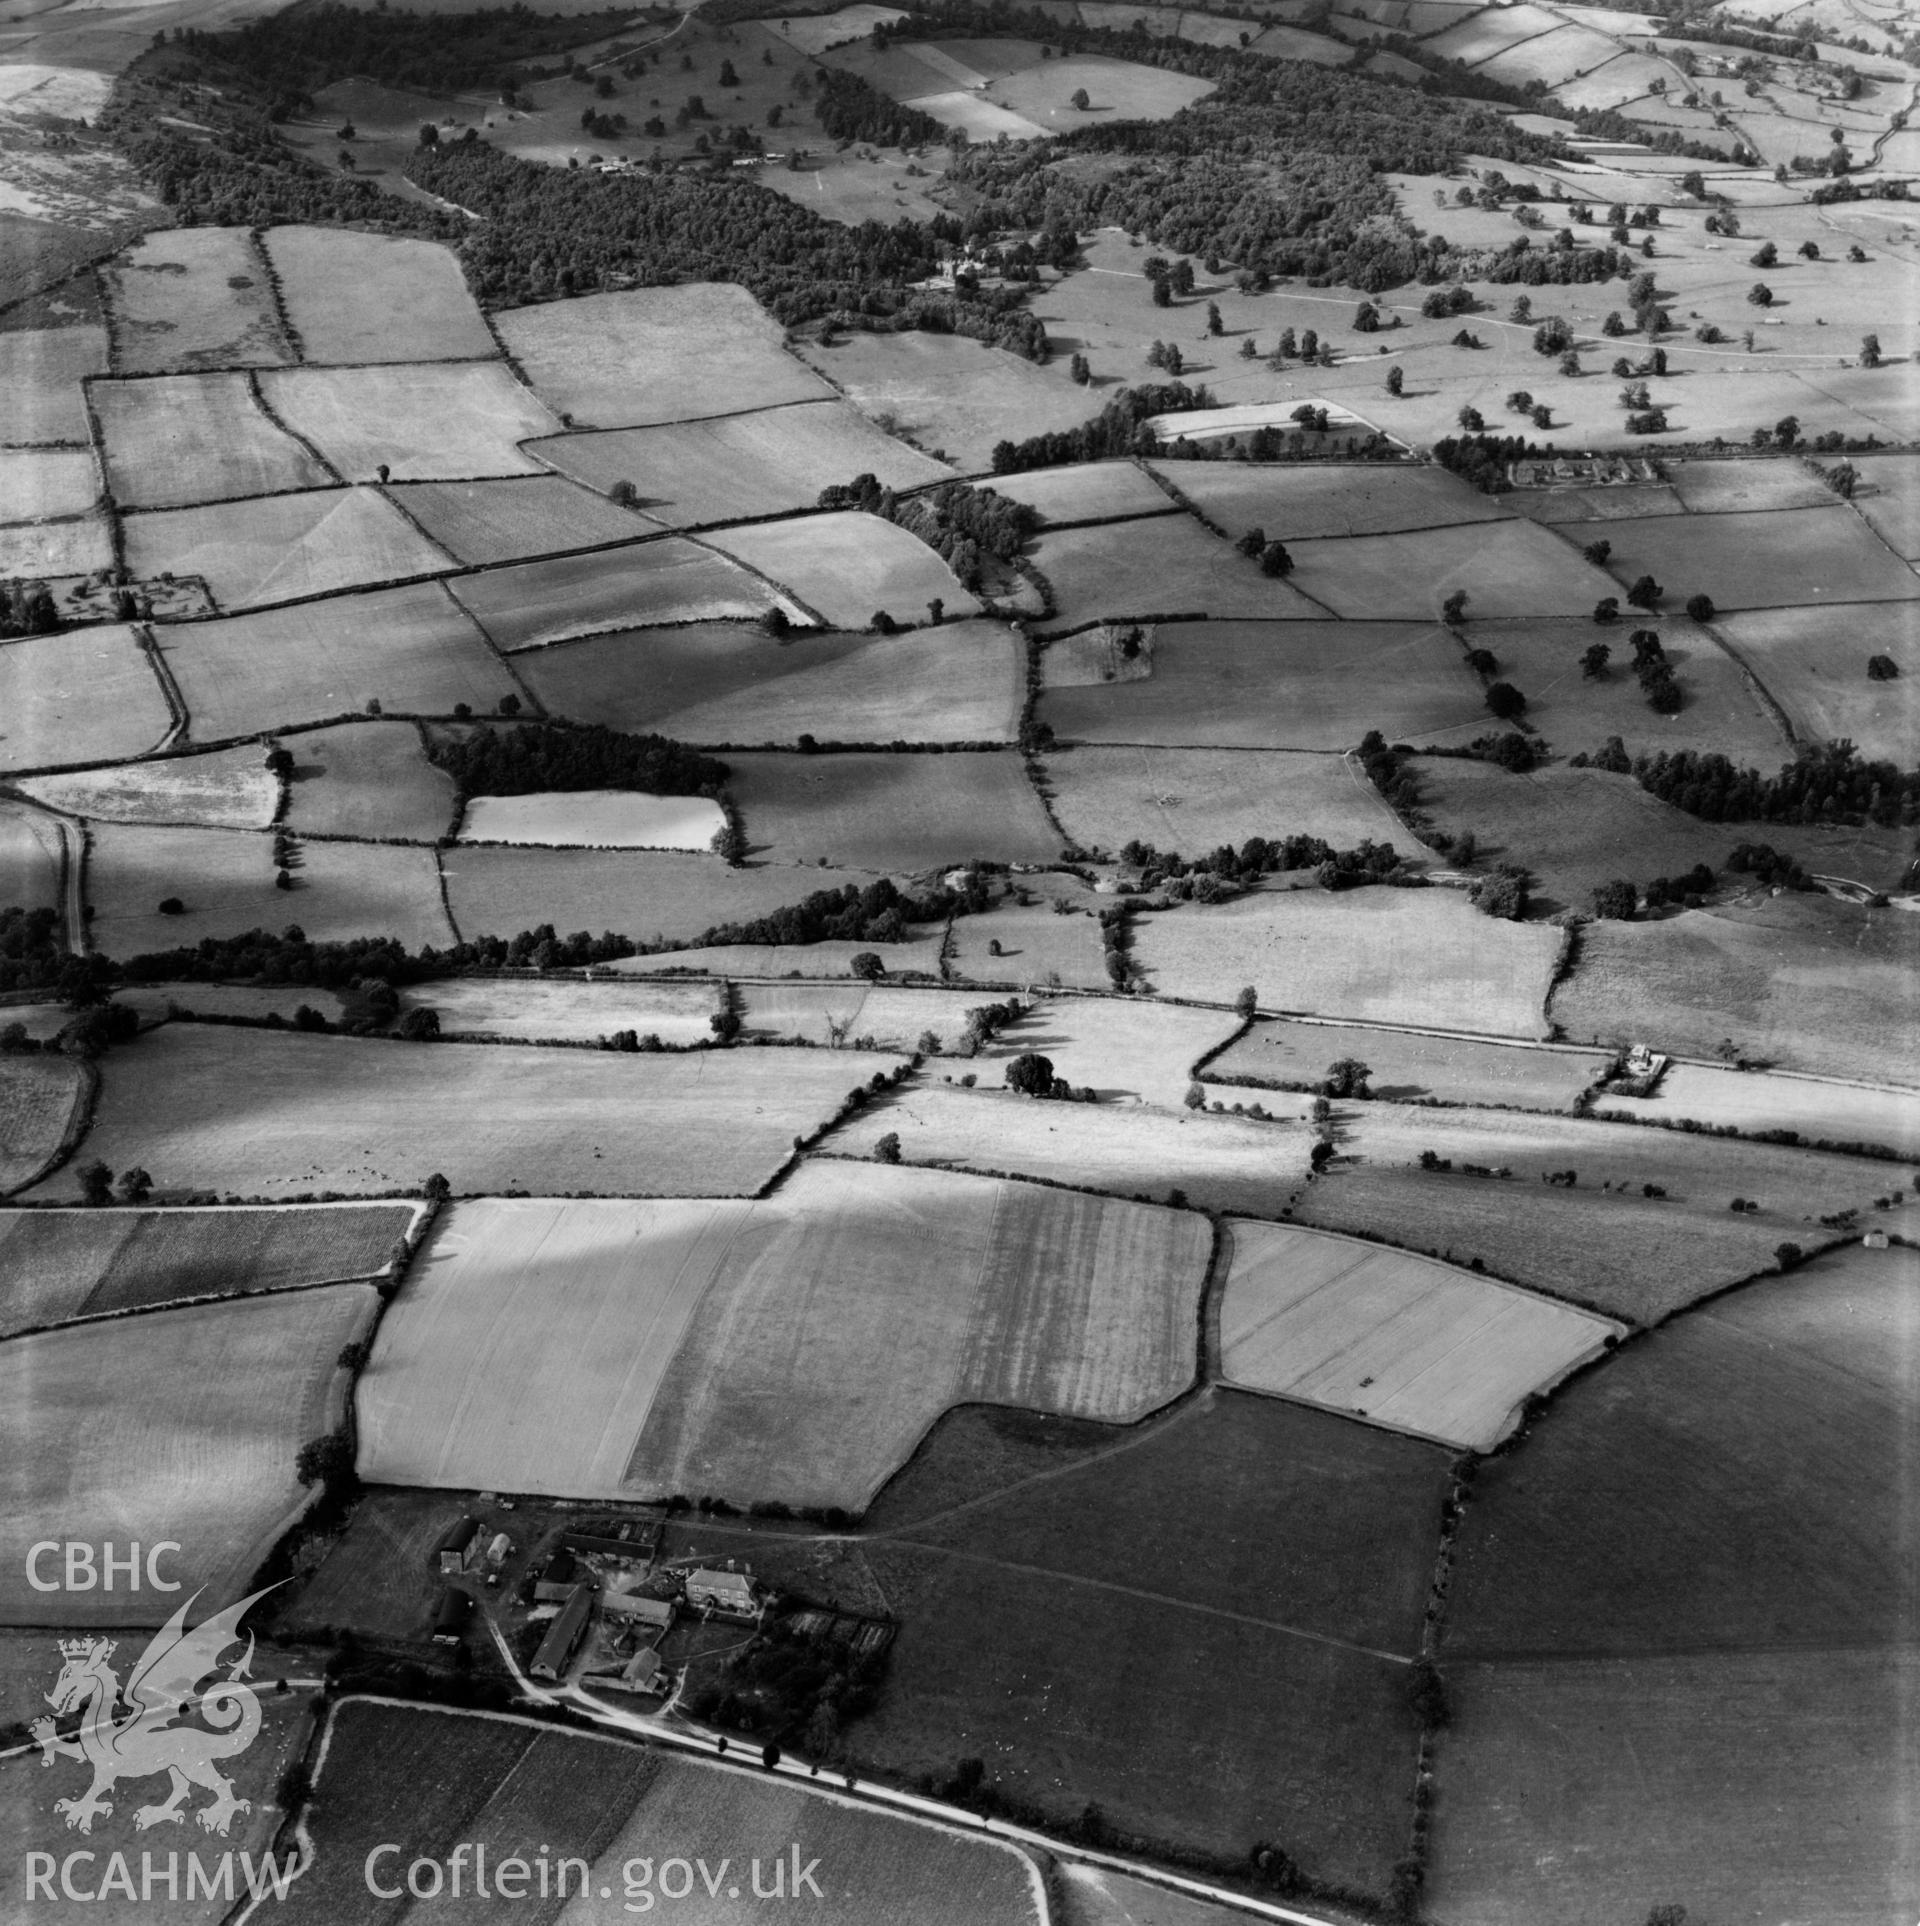 View of Lugg valley showing The Hill, Warden Road. Oblique aerial photograph, 5?" cut roll film.